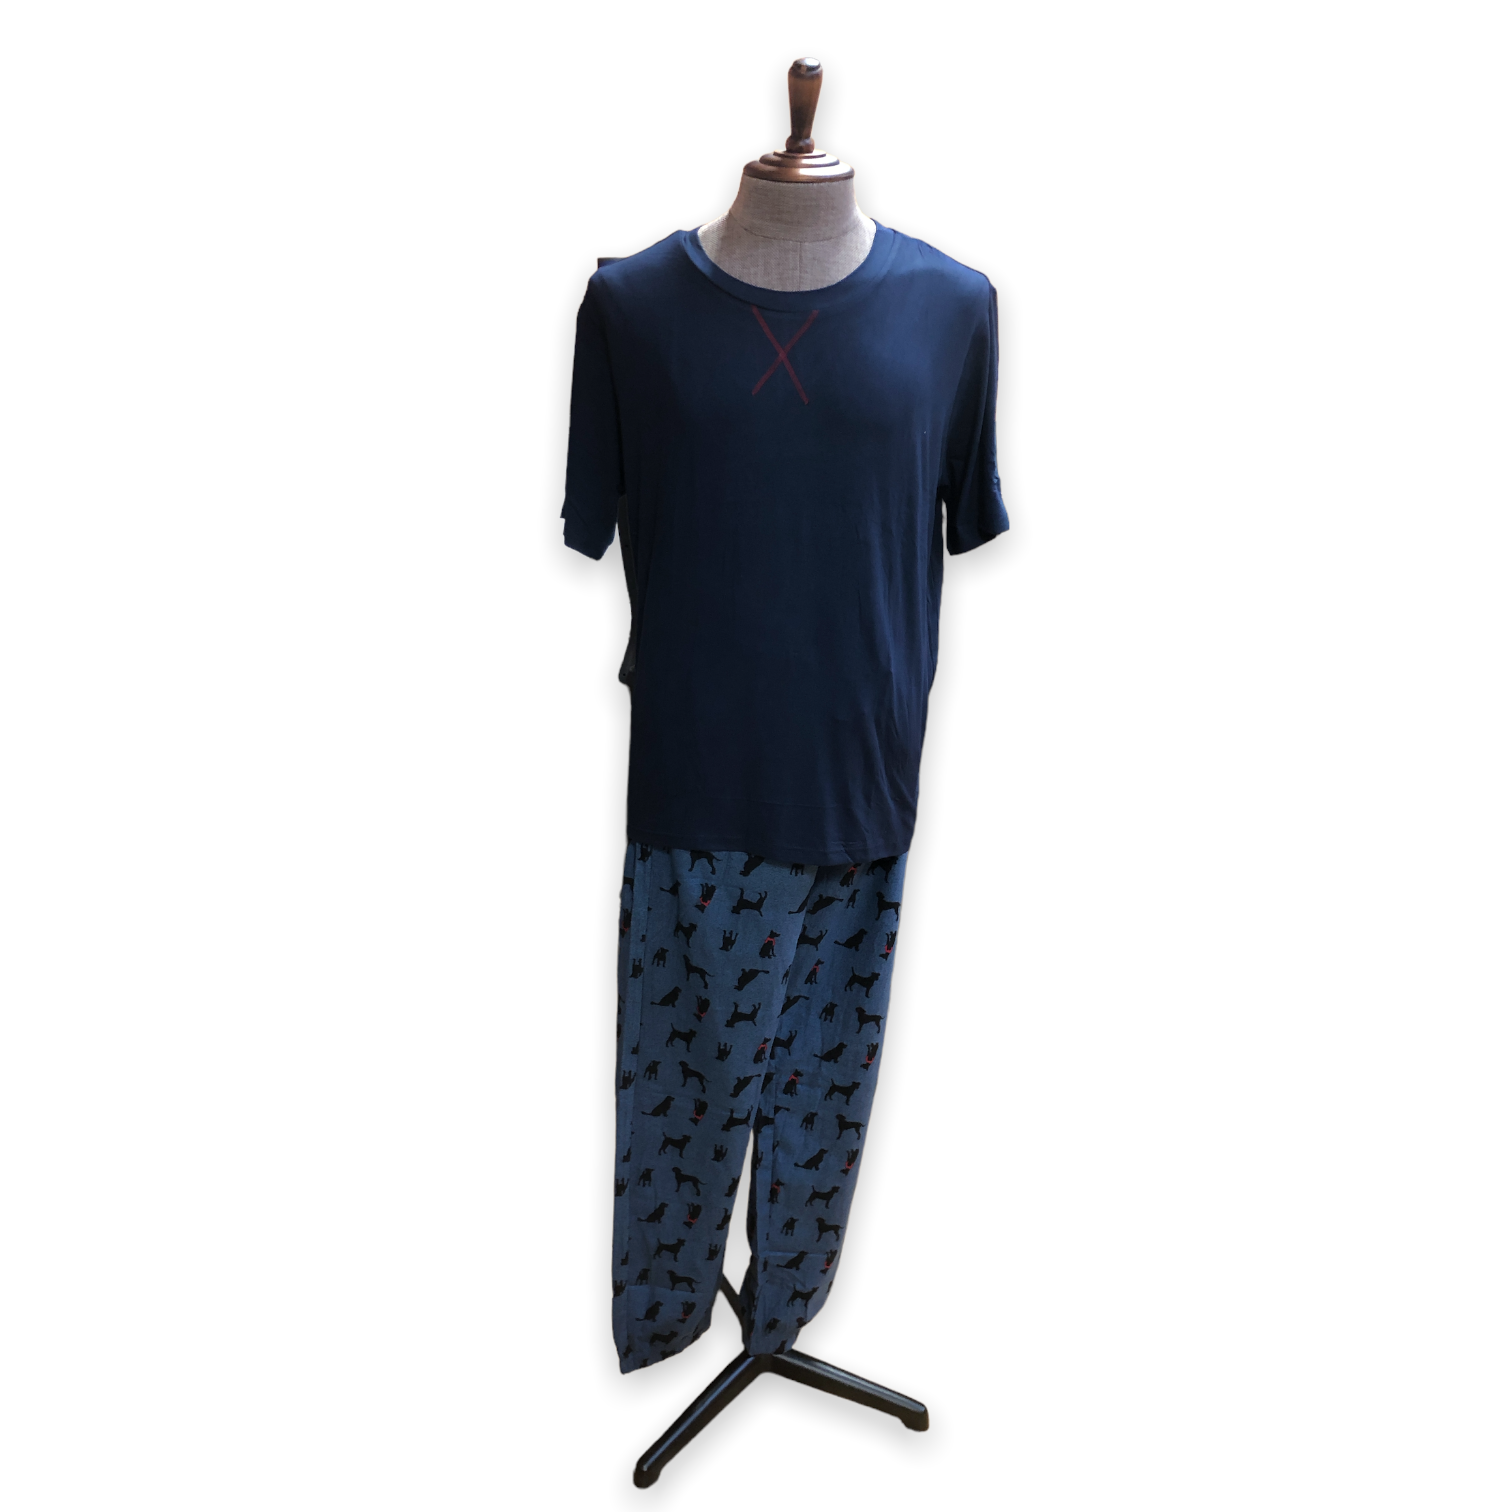 Men's Two Piece Pressed Micropolar Pajama Set with T-Shirt (Gift Packaged)